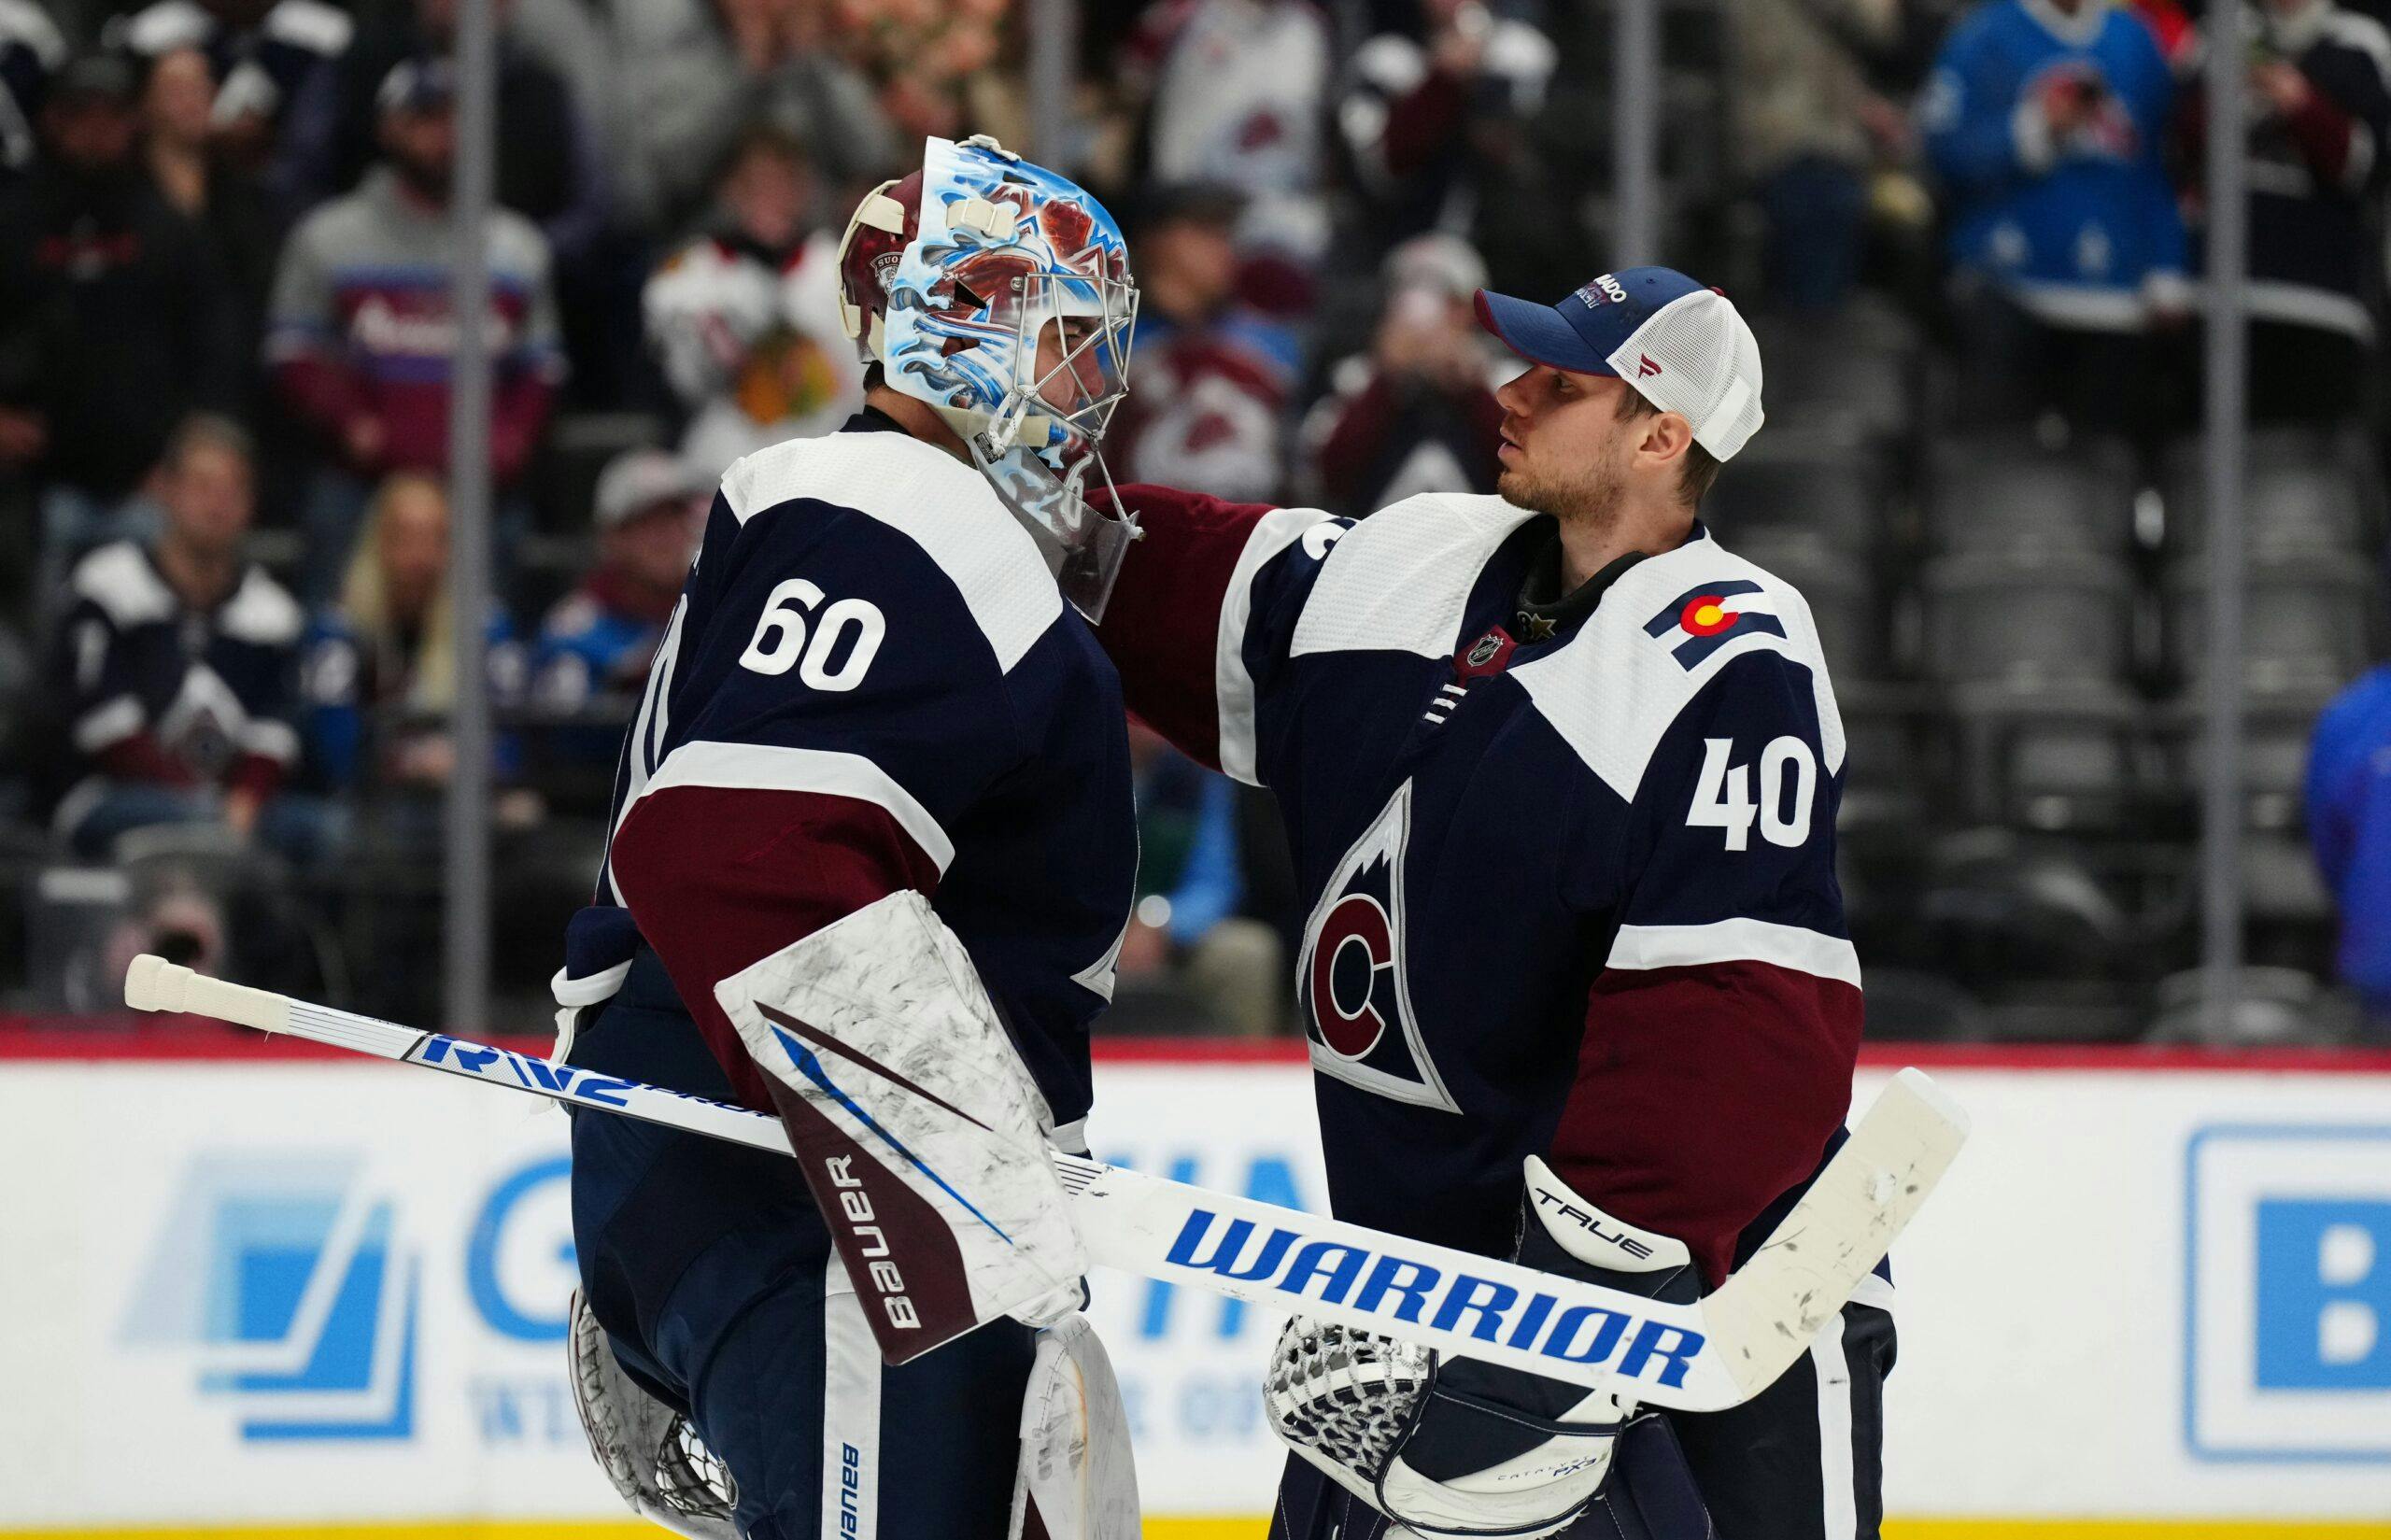 Colorado Avalanche need their goaltending to be much better heading into playoffs